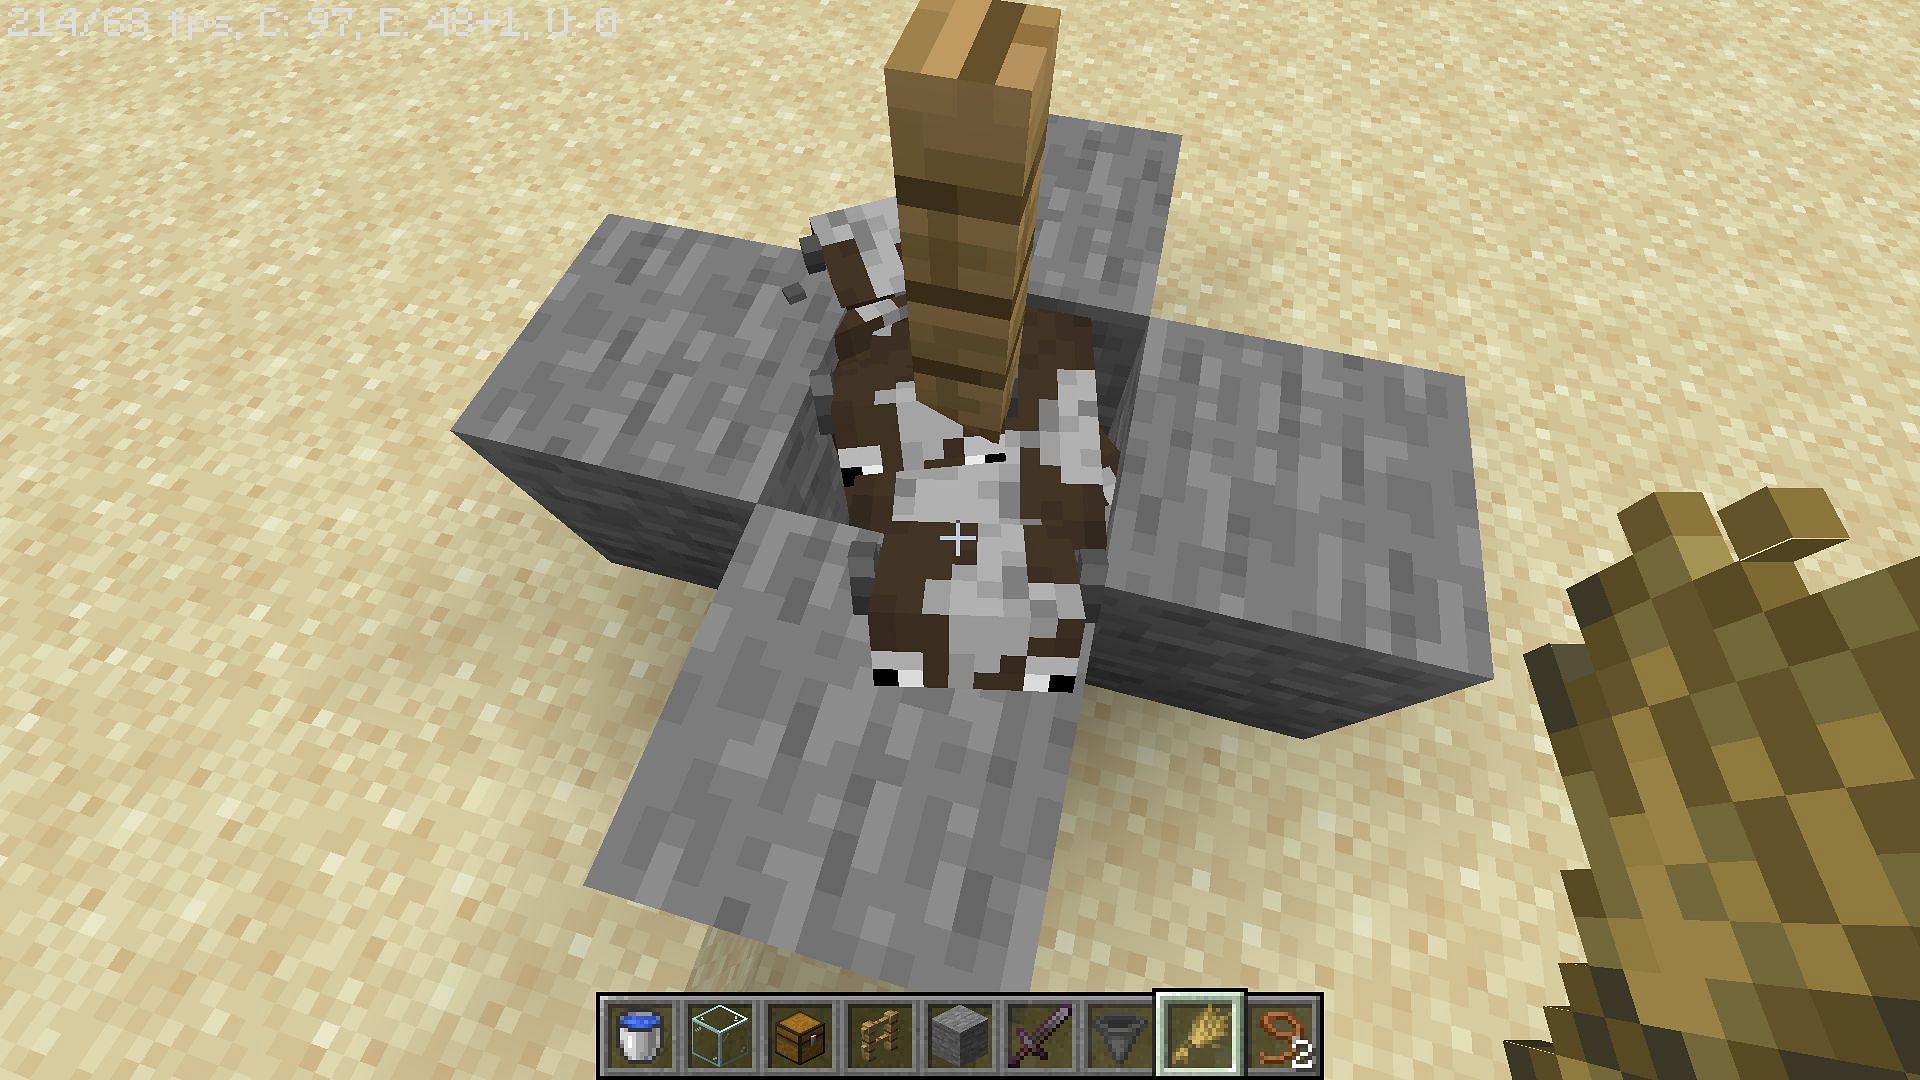 Build walls around the hopper area where the mobs will be crushed in Minecraft (Image via Mojang)